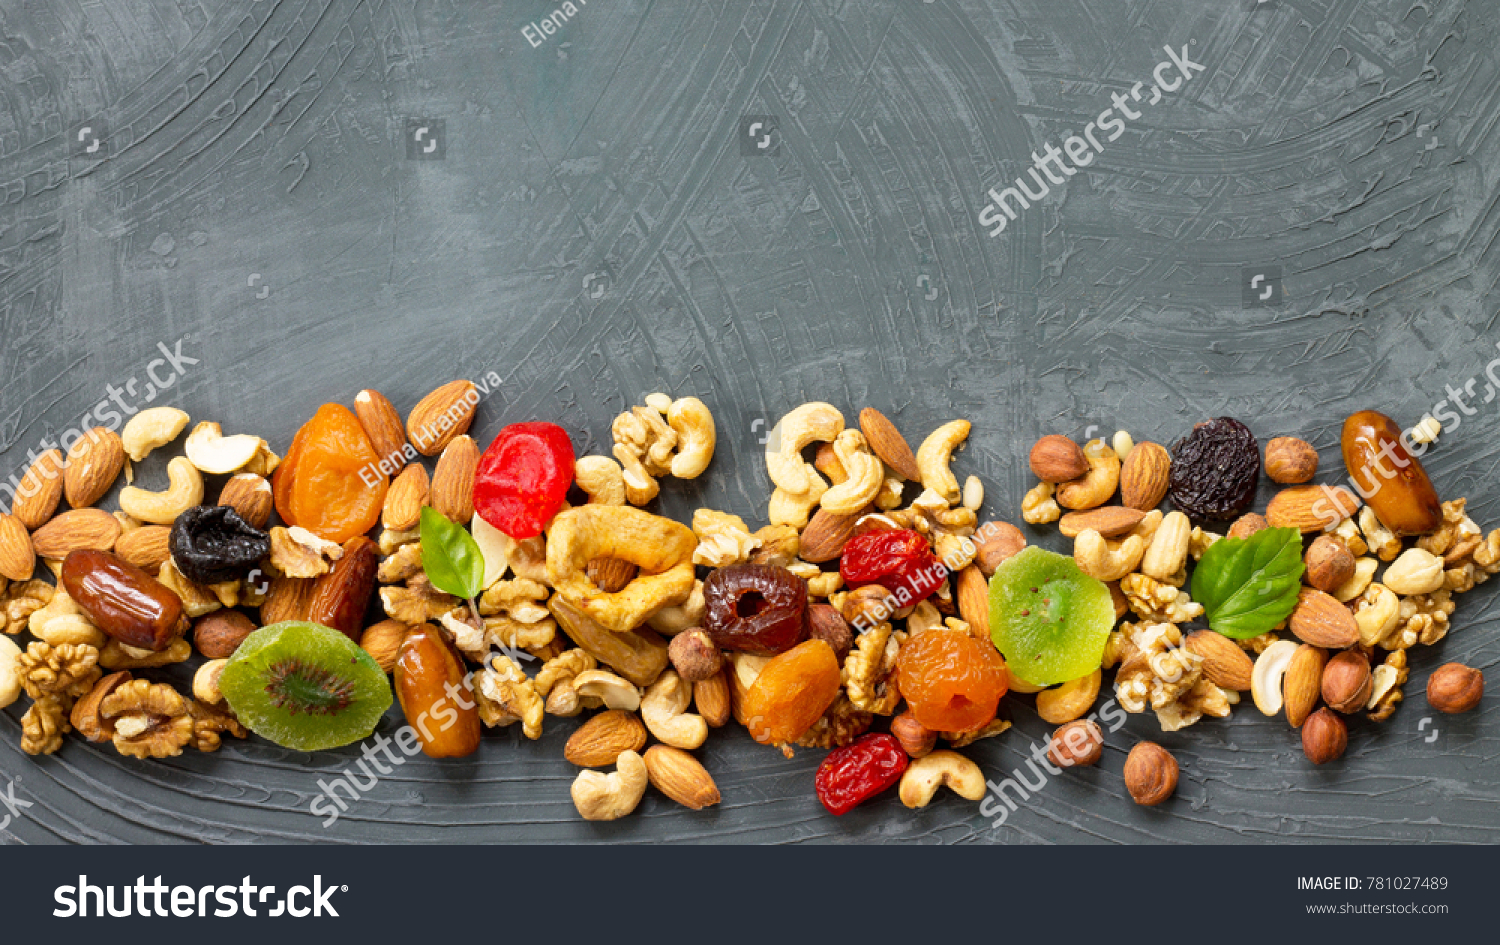 Various dried fruits and mix nuts on a gray stone or slate background.  The concept of the Jewish holiday Tu Bishvat. Flat lay, top view with copy space. #781027489